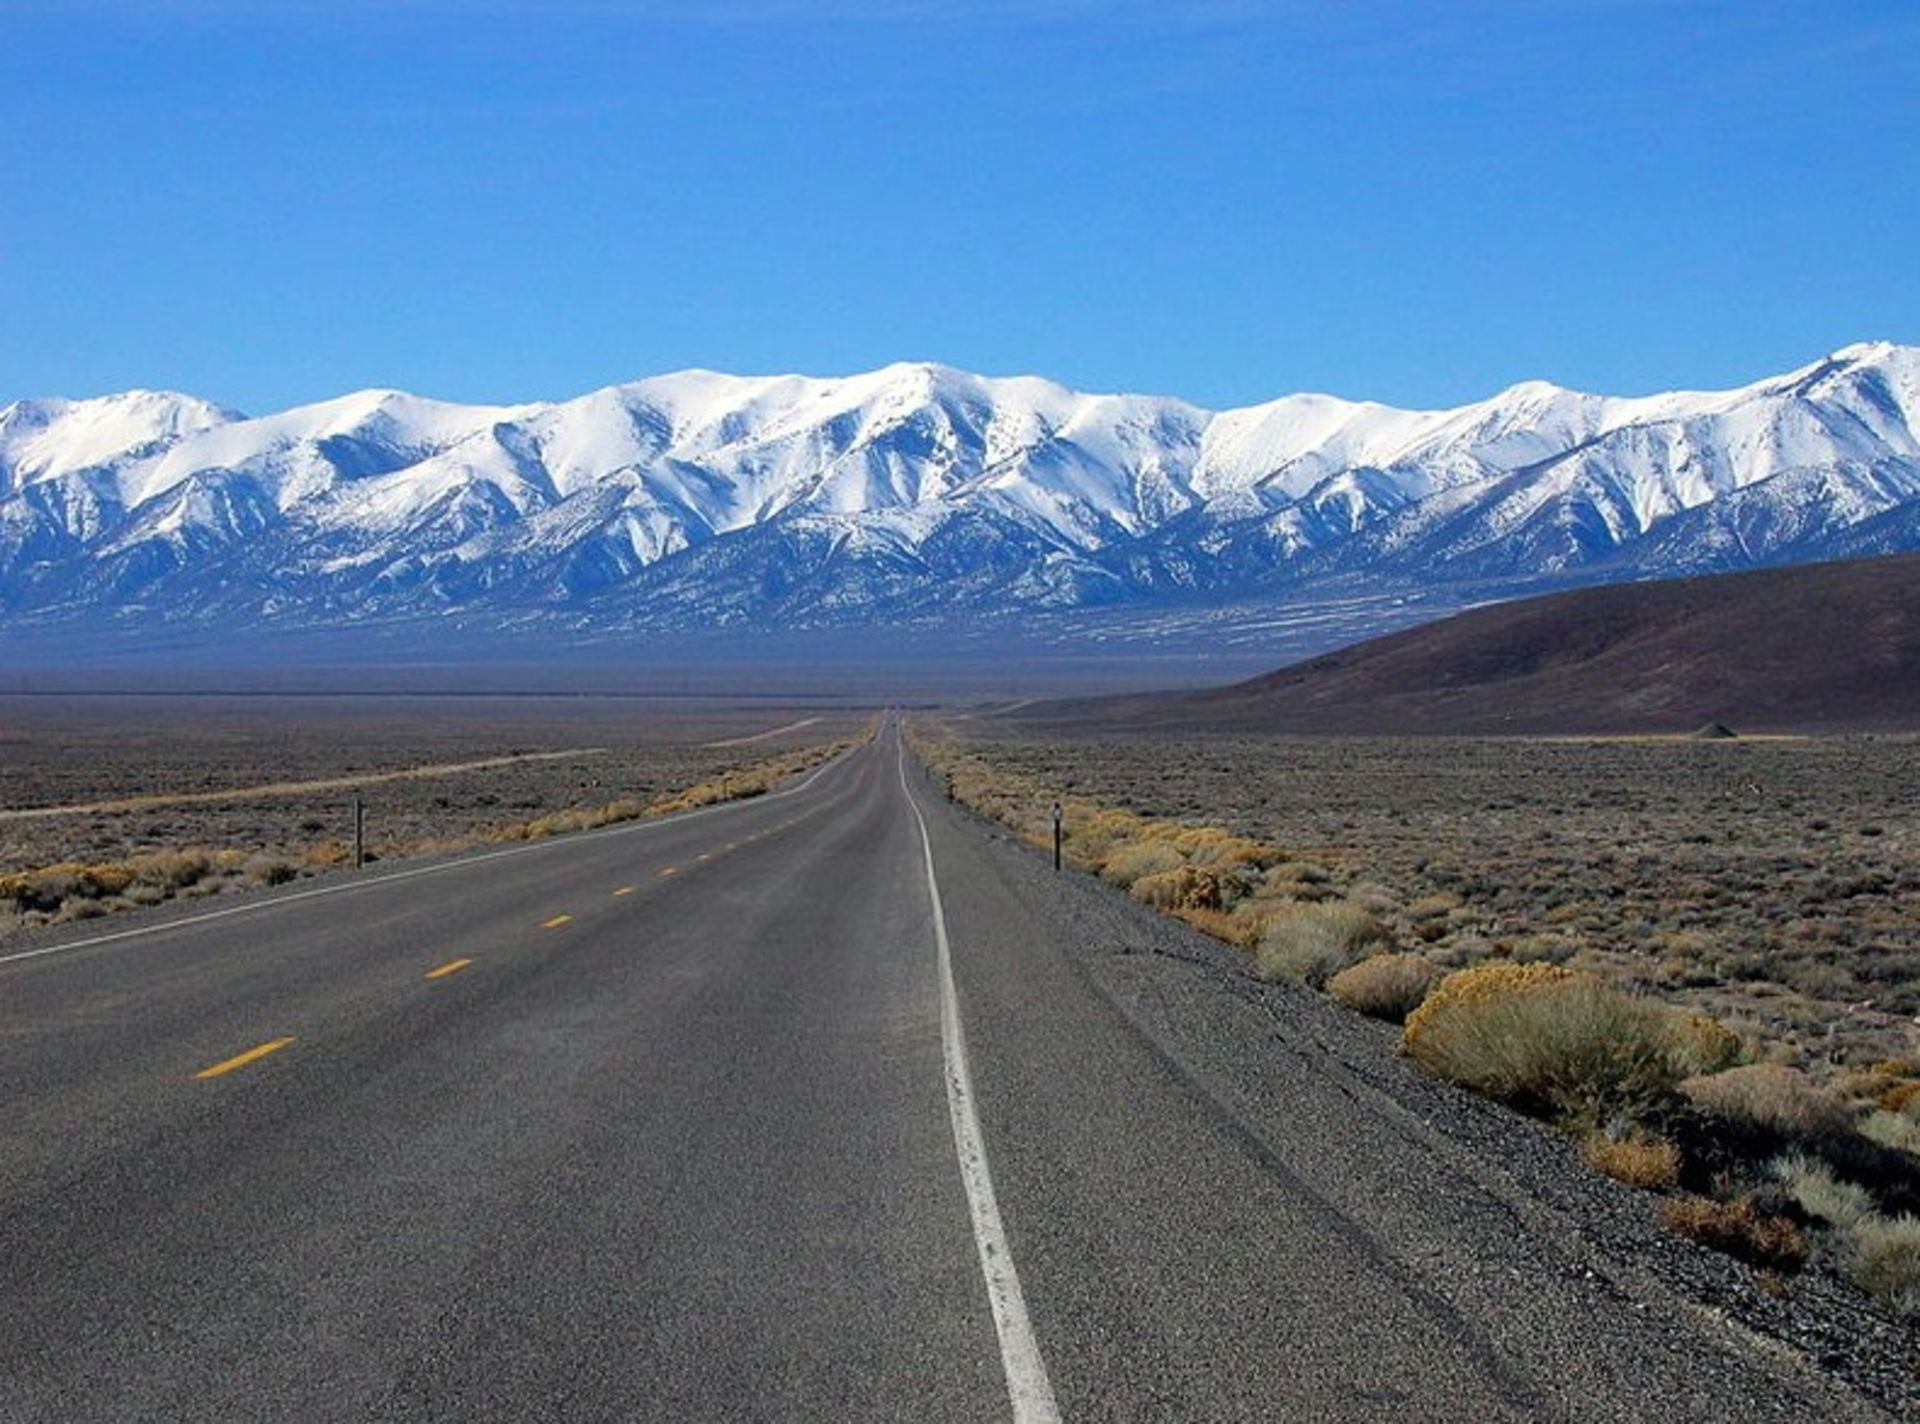 160 Acres Amidst Majestic Mountains in Lander County, Nevada! BIDDING IS PER ACRE! - Image 8 of 16